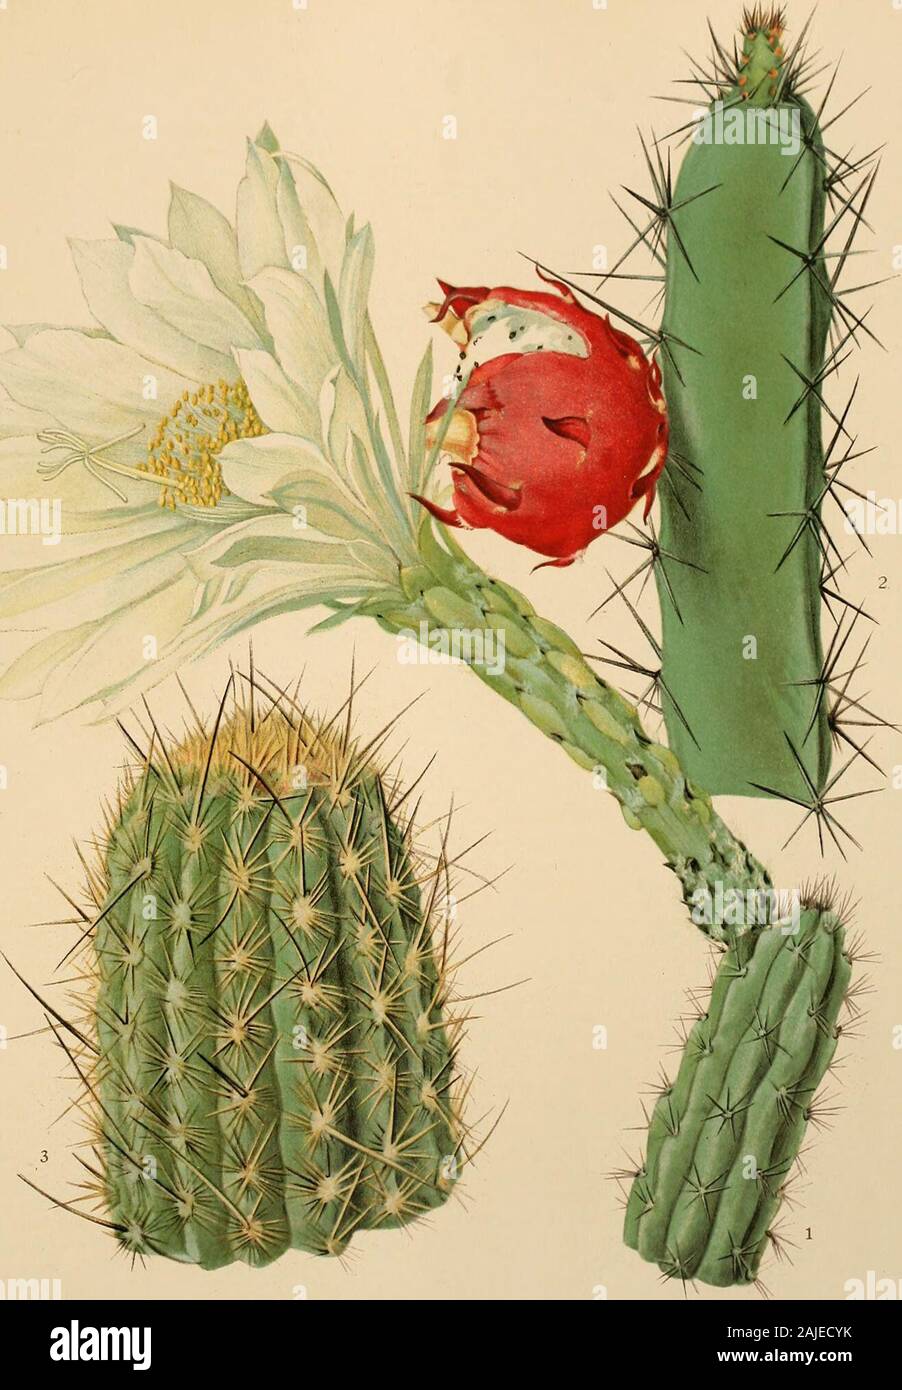 The Cactaceae : descriptions and illustrations of plants of the cactus family . upper scales and outer perianth-segments mauve;limb 4 to 5 cm. broad when fully expanded; inner perianth-segments usually white, sometimesgreenish, oblong, obtuse, 2 to 2.5 cm. long; style cream-colored, much exserted; stigma-lobes greenish;fruit red, its pulp white, edible, slightly acid. Type locality: Santa Clara, east of Lima, Peru. Distribution: Very common on the hills above Lima, from Santa Clara to Matucana.This is one of the most common species in central Peru, being especially abundant onthe hillsides and Stock Photo